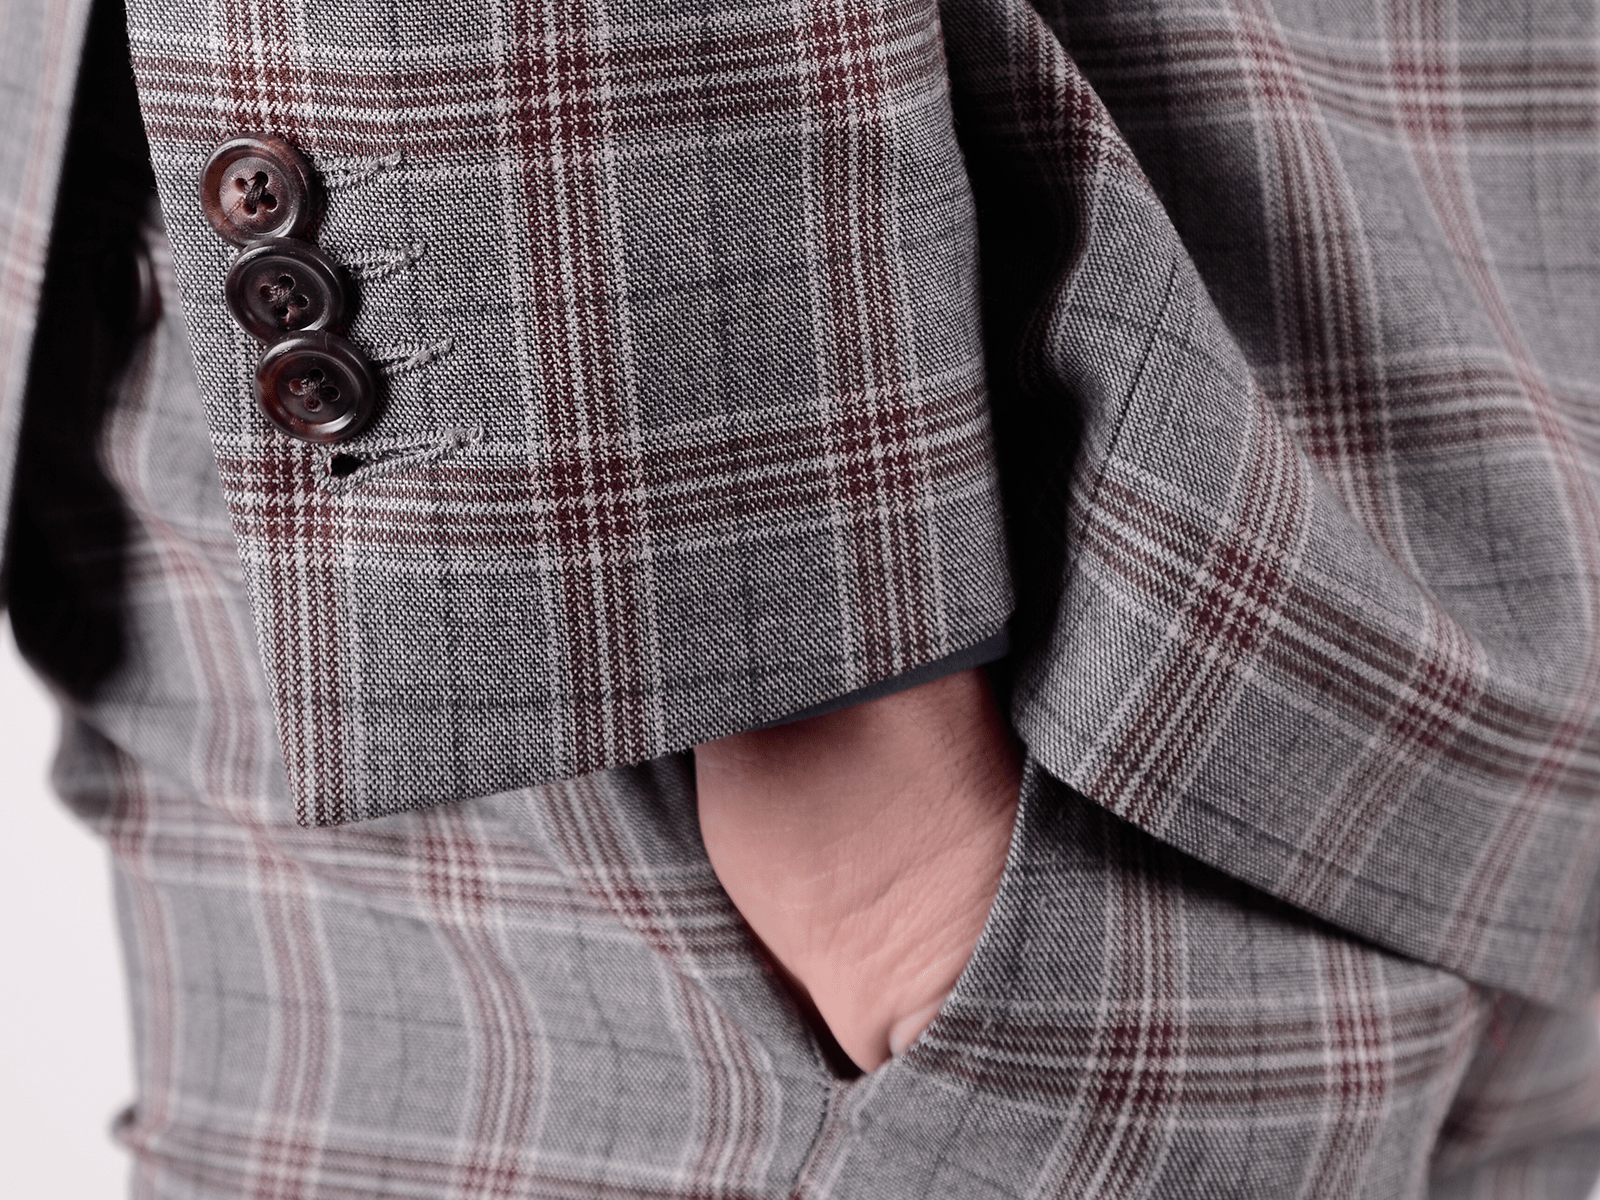 Detail on a 3 button jacket sleeve and hand in pocket